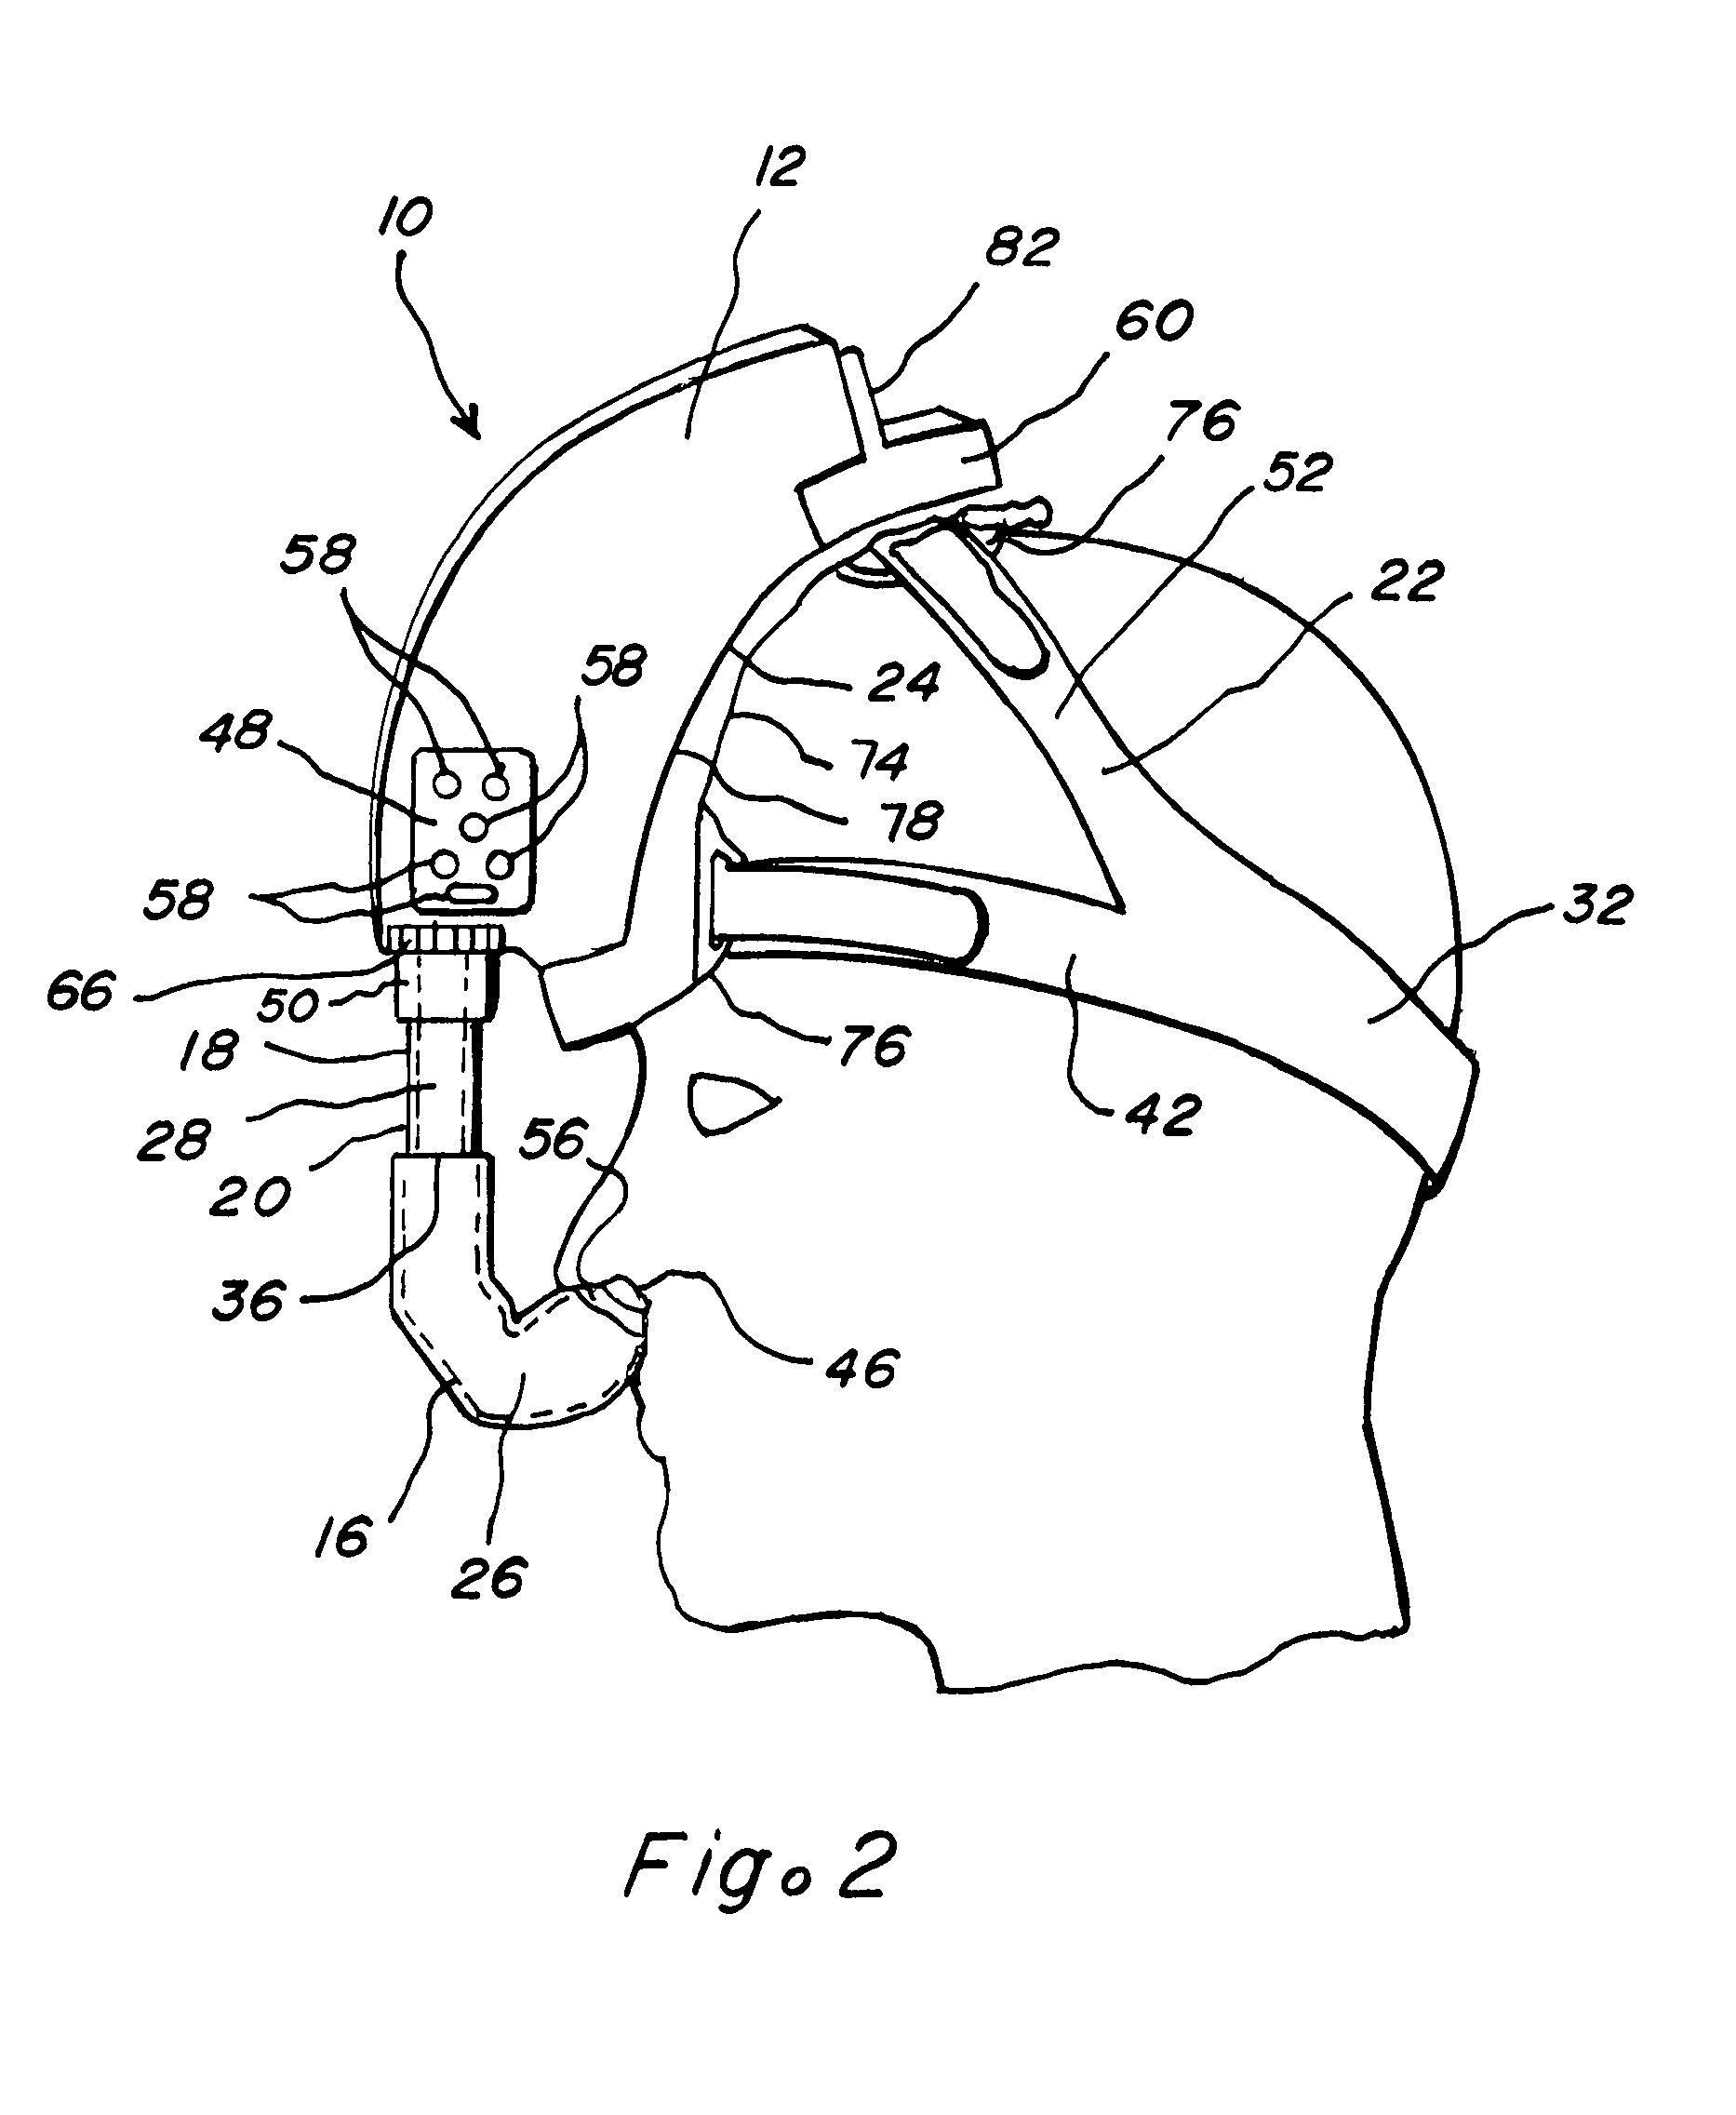 Apparatus and methods for administration of positive airway pressure therapies